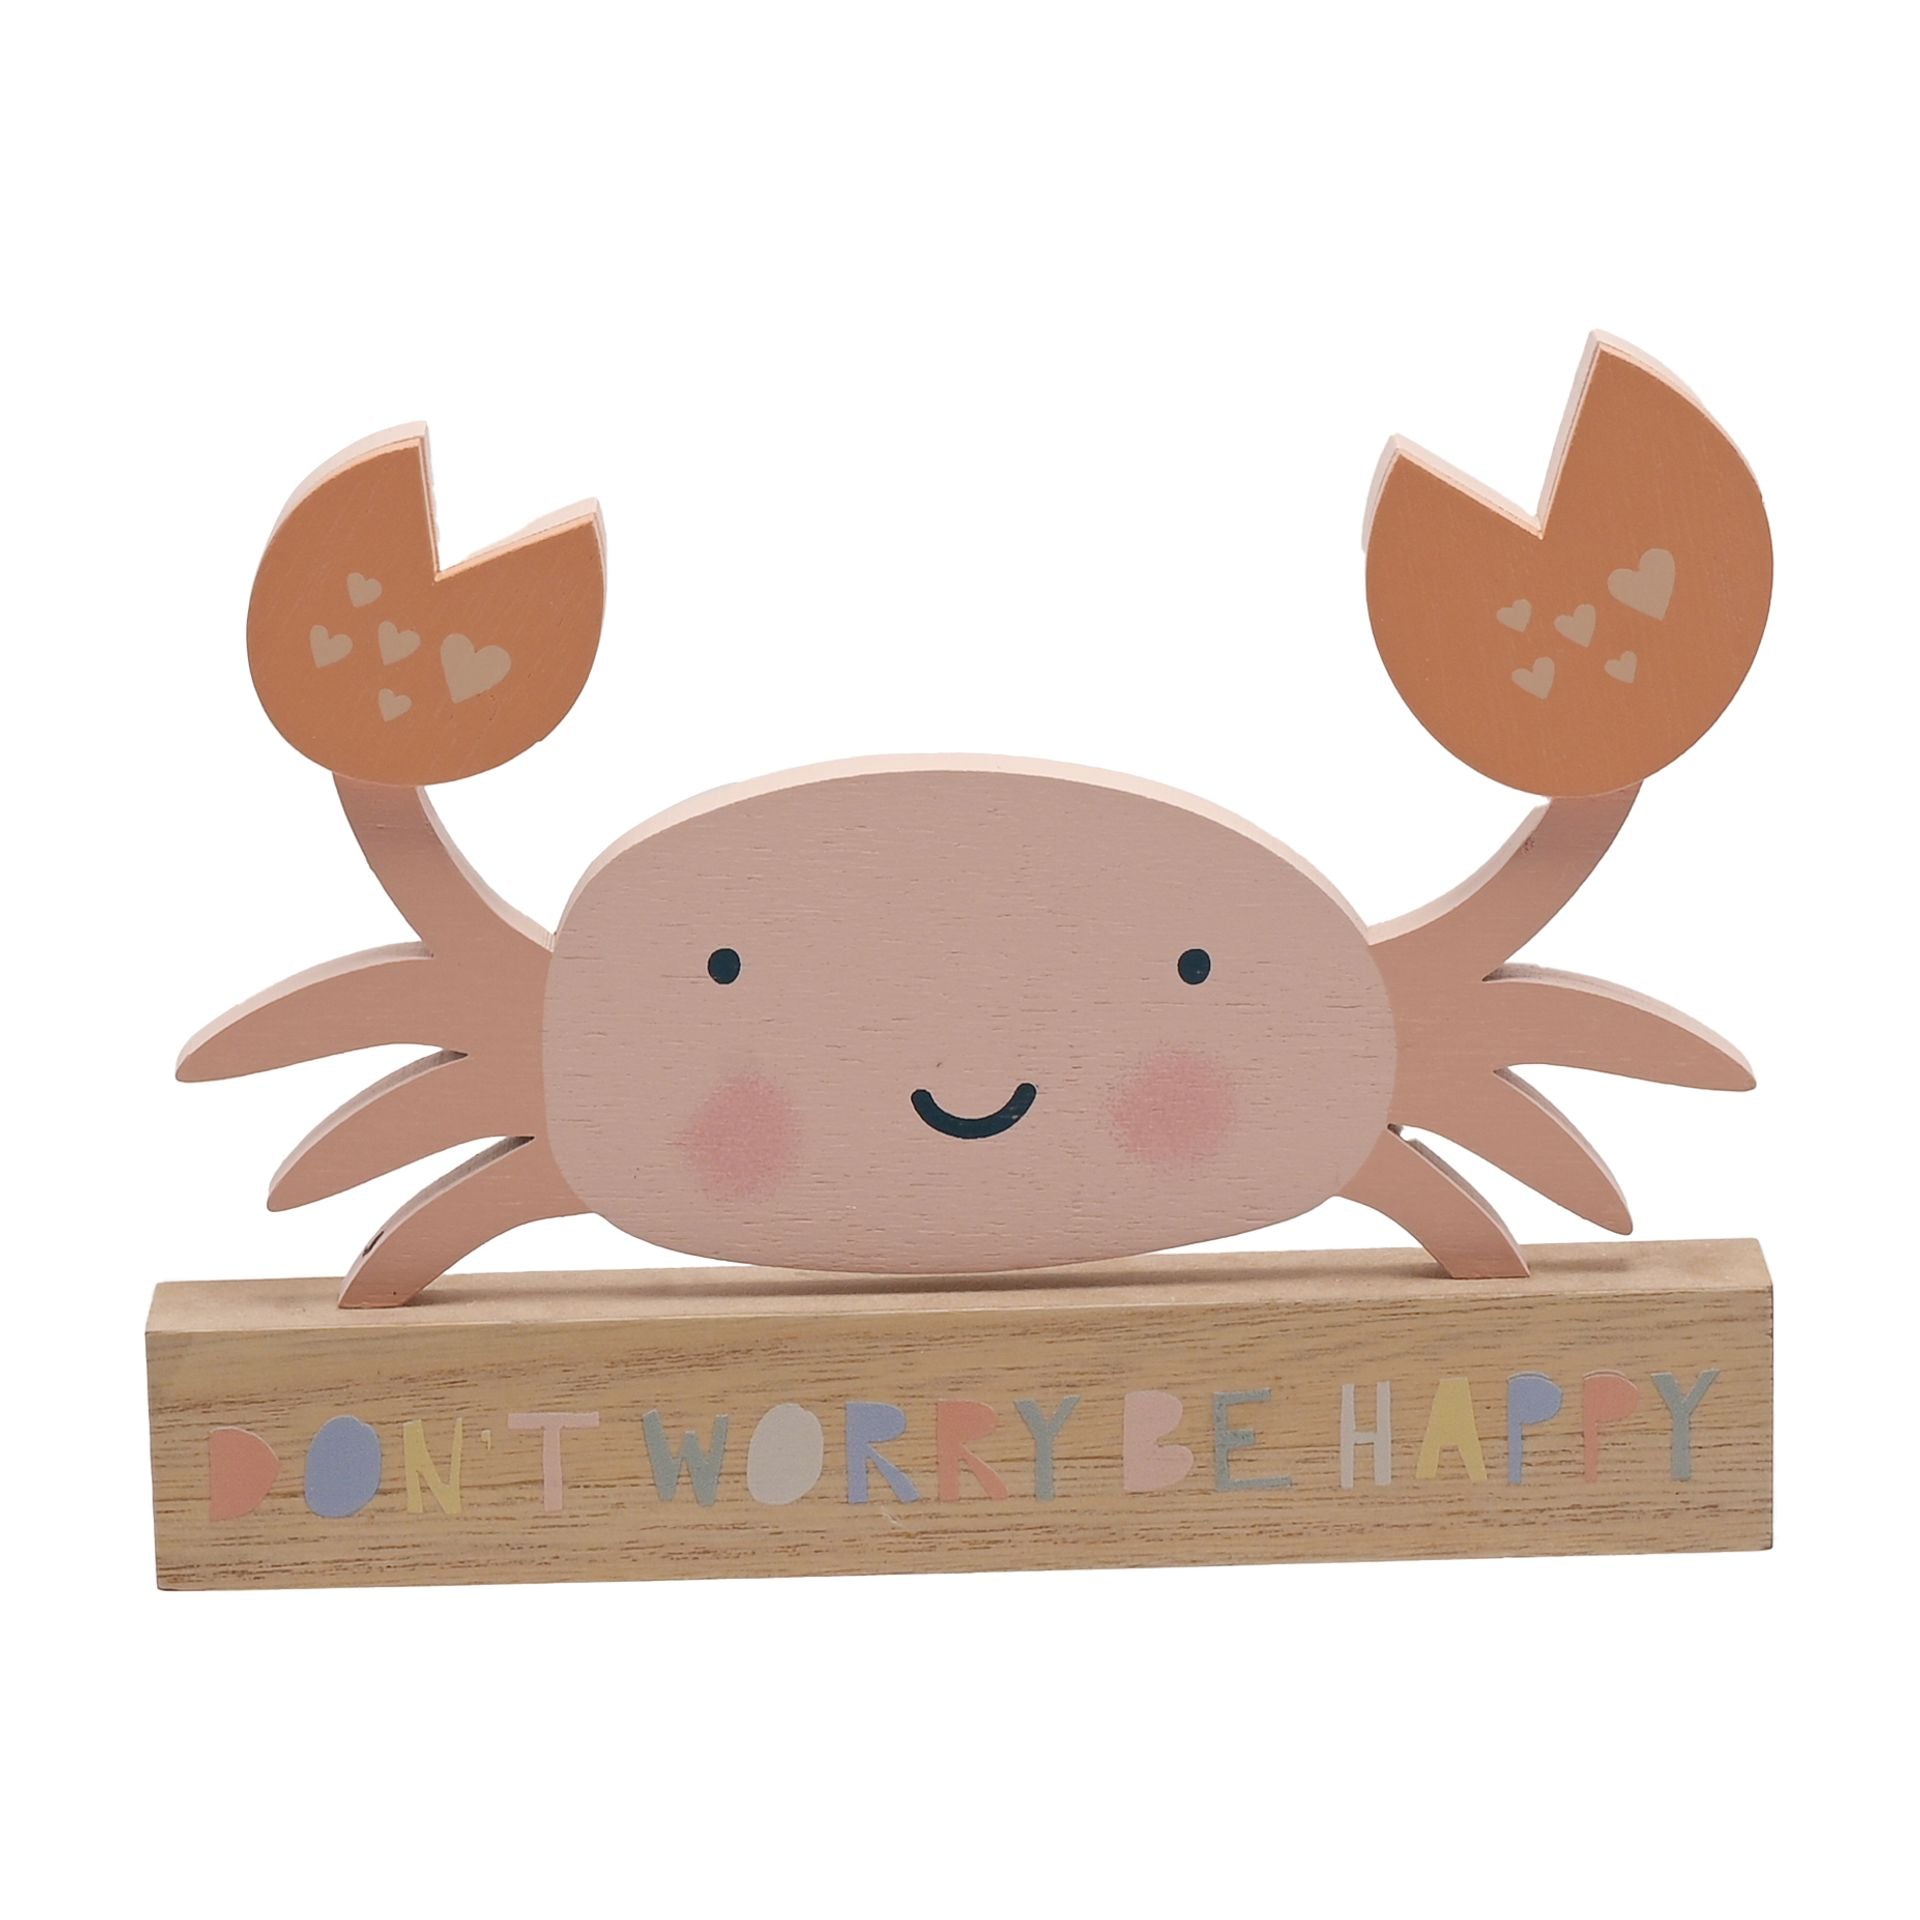 Our Crab Mantel Plaque is a gorgeous addition to any child&#39;s bedroom. Featuring a don’t worry be happy message, this wooden plaque is decorated with an adorable pink crab.